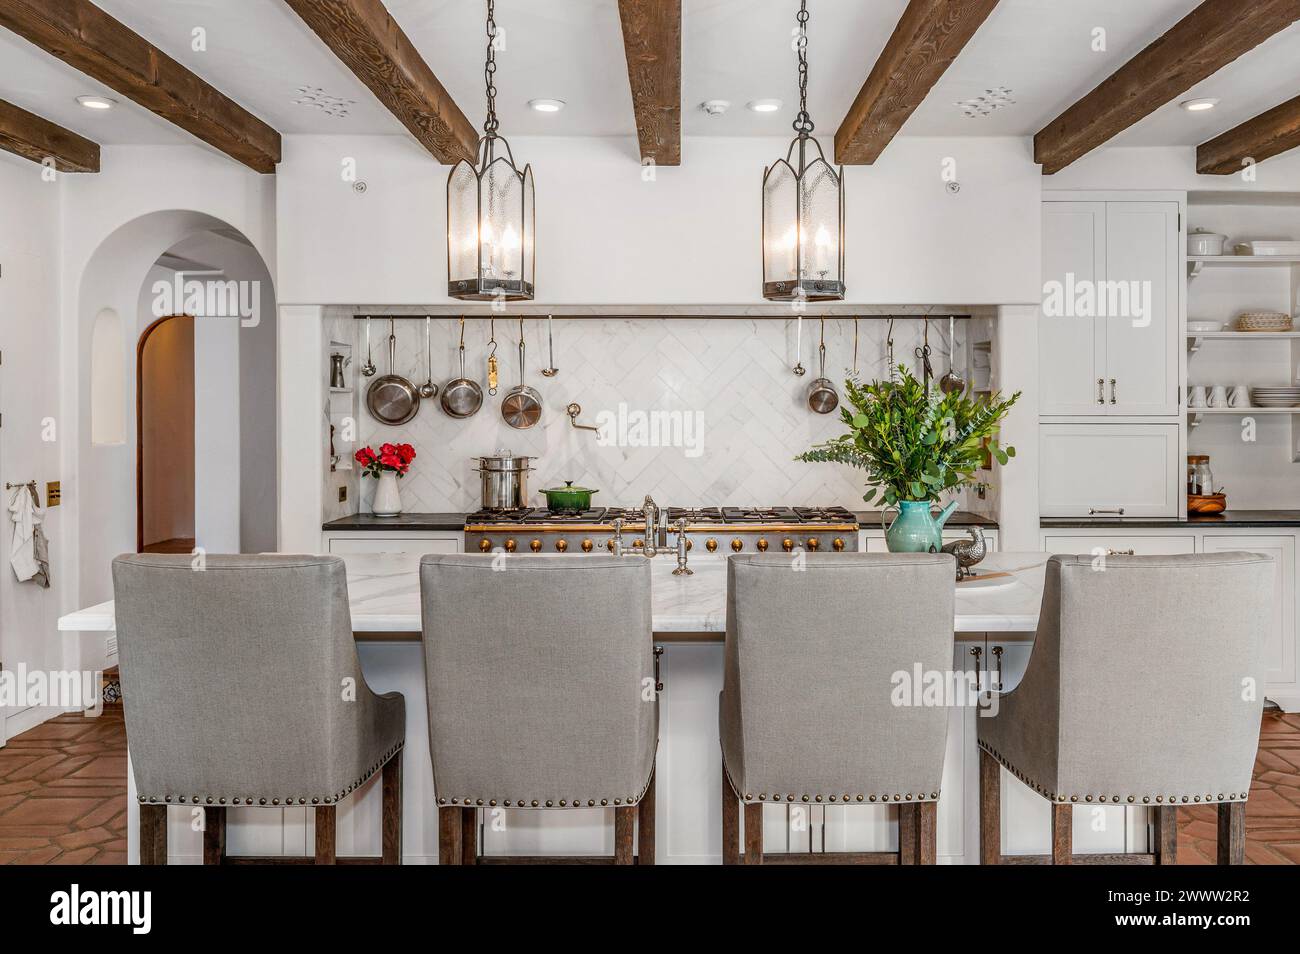 A modern kitchen with white walls, wooden beams, counters, and chairs Stock Photo